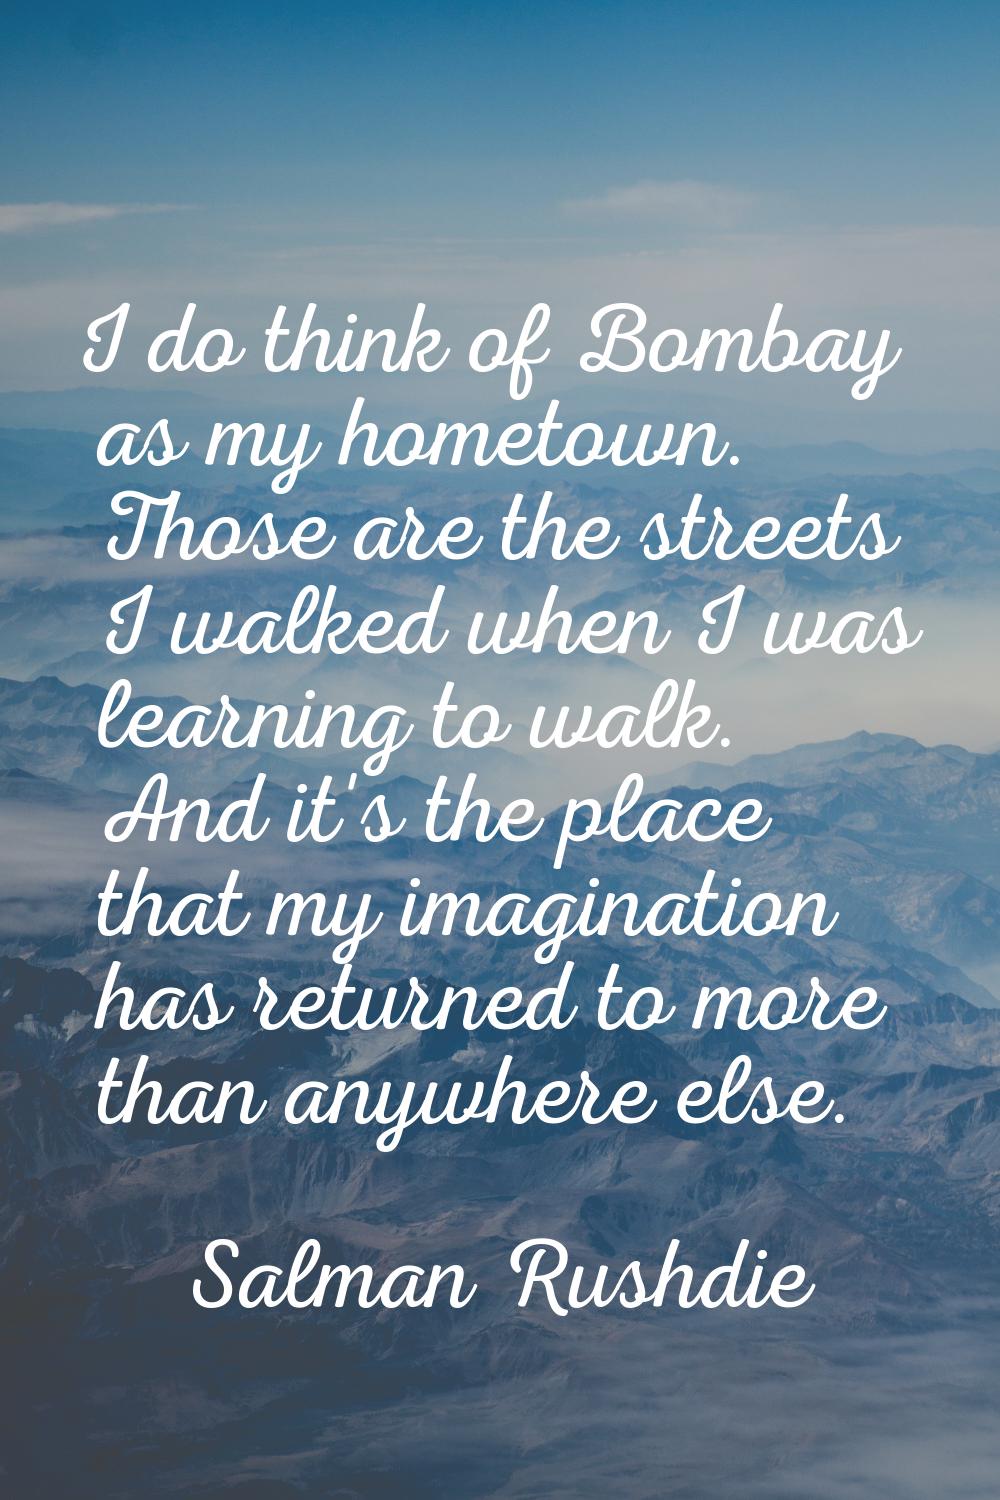 I do think of Bombay as my hometown. Those are the streets I walked when I was learning to walk. An